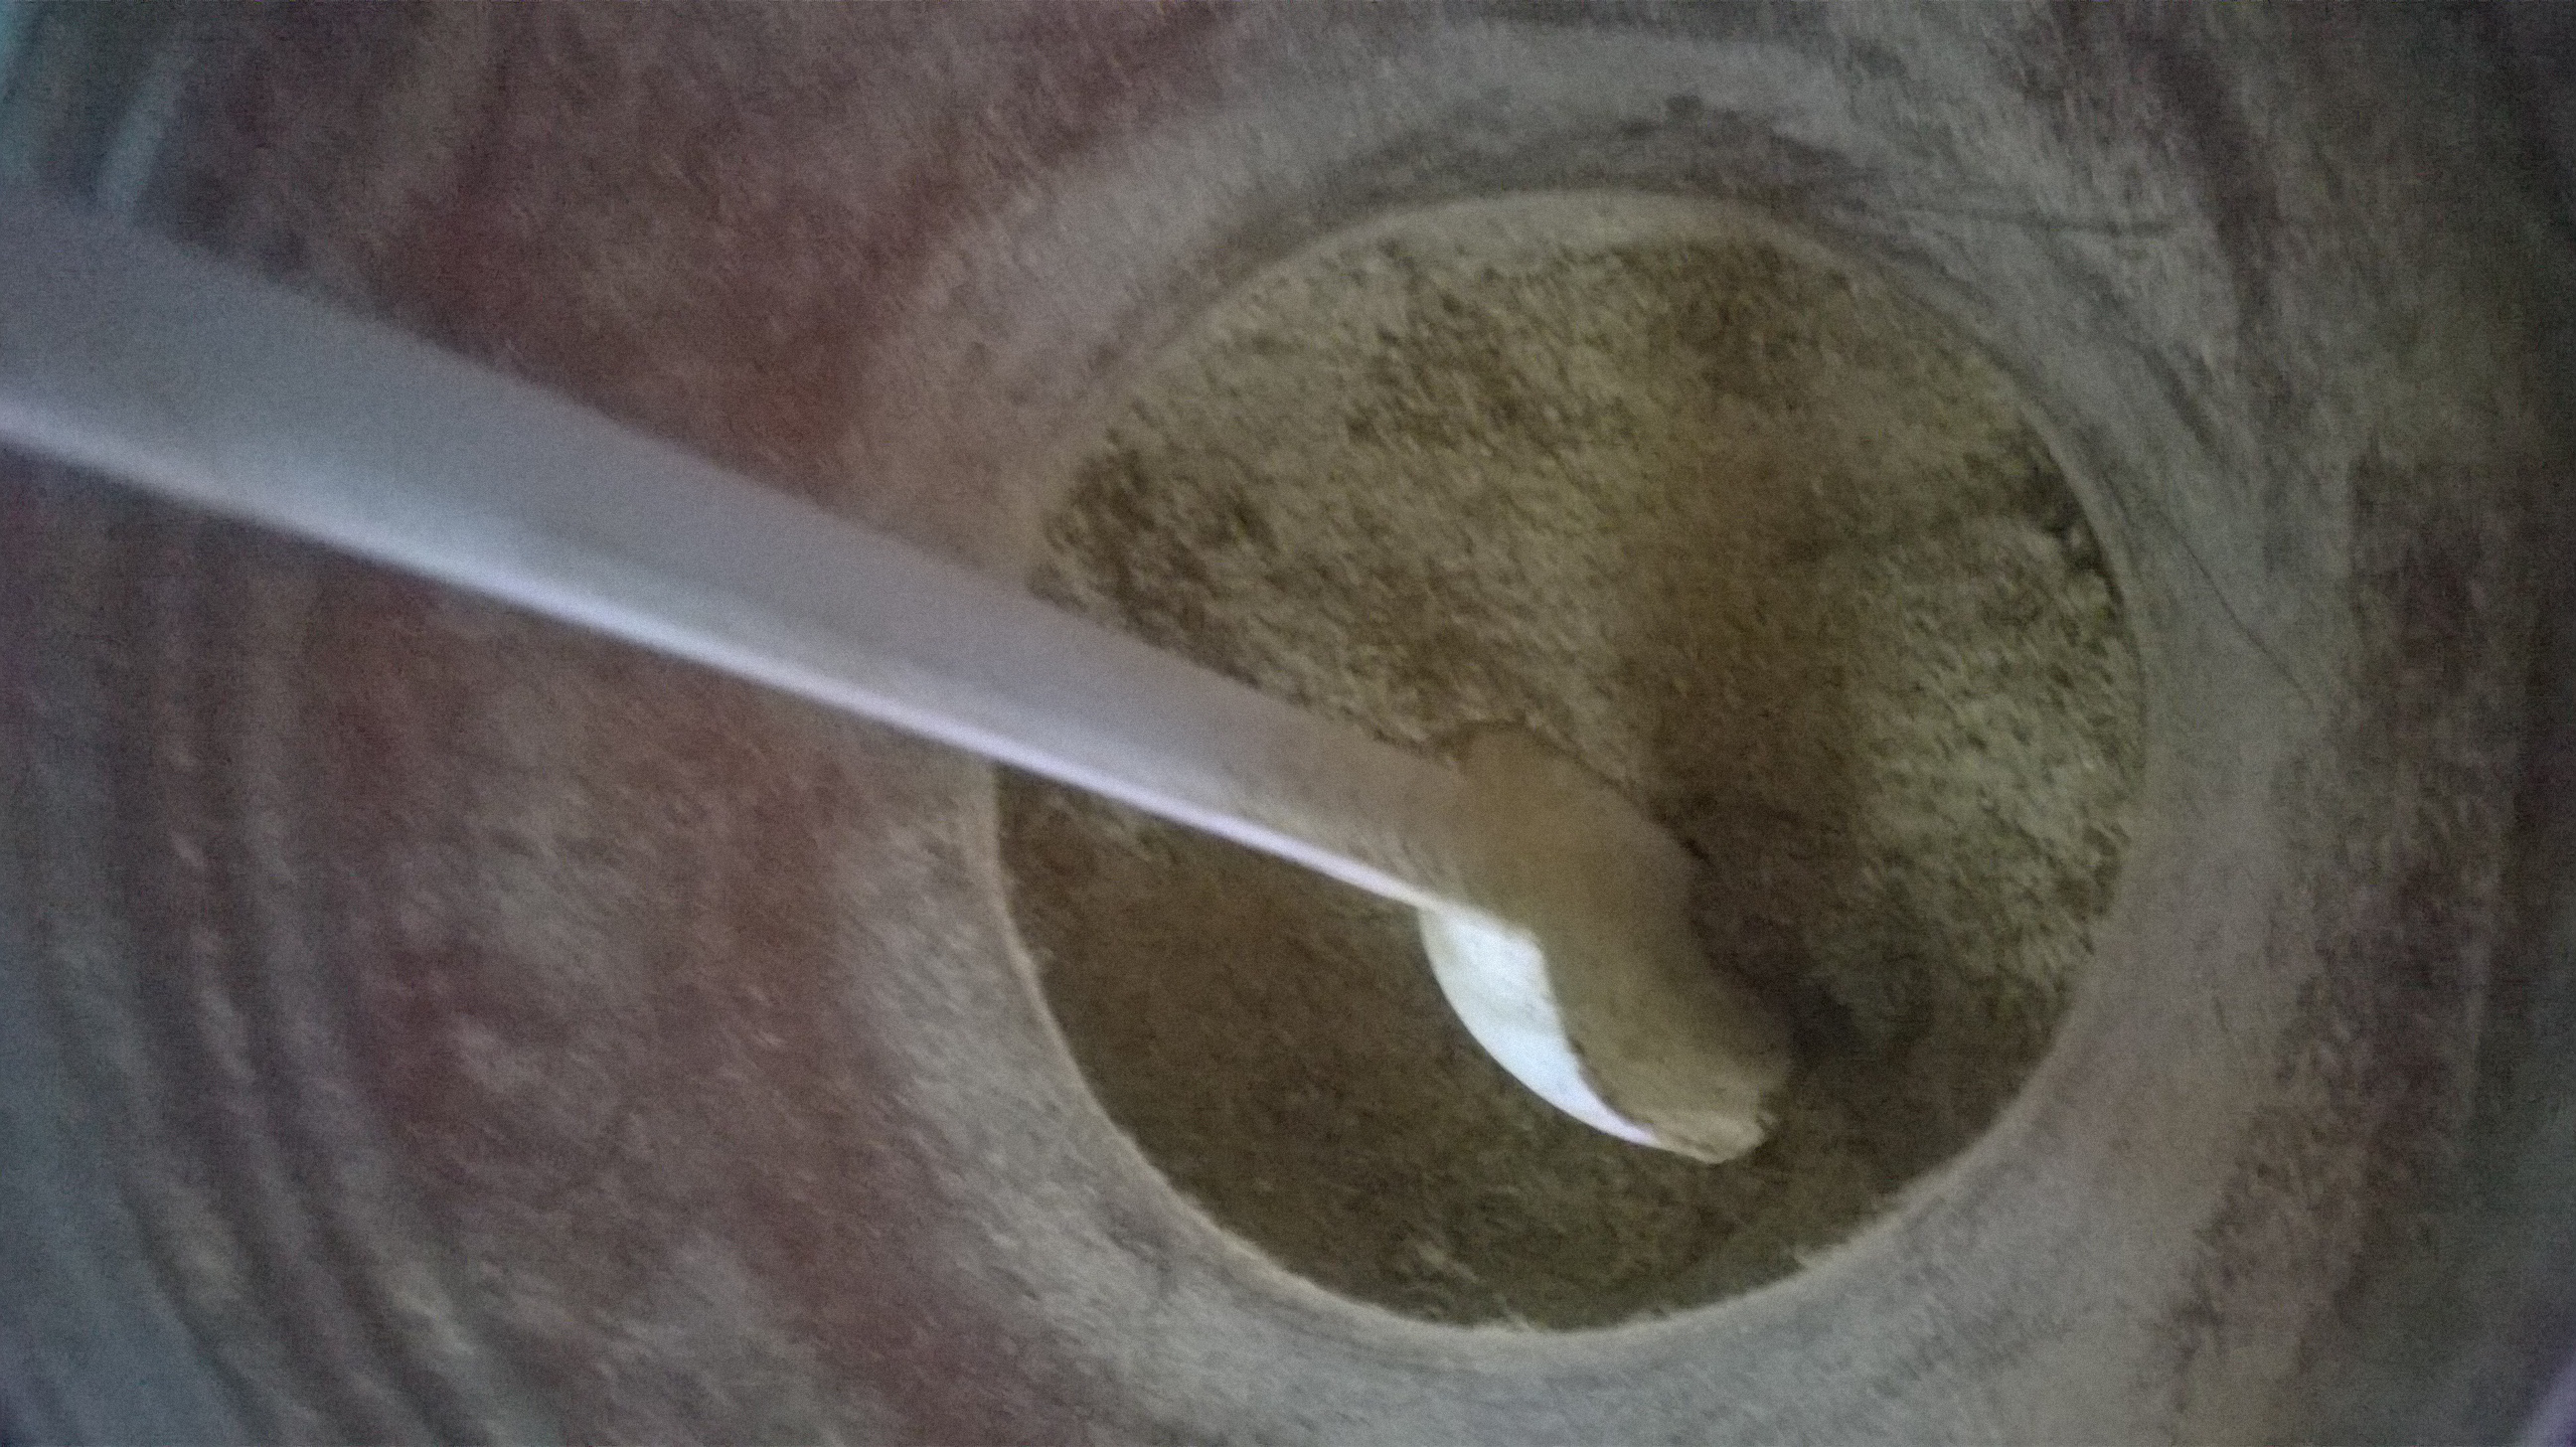 HomeMadeStayFitHerbalPowder for better Digestion which relieves Gas and Constipation